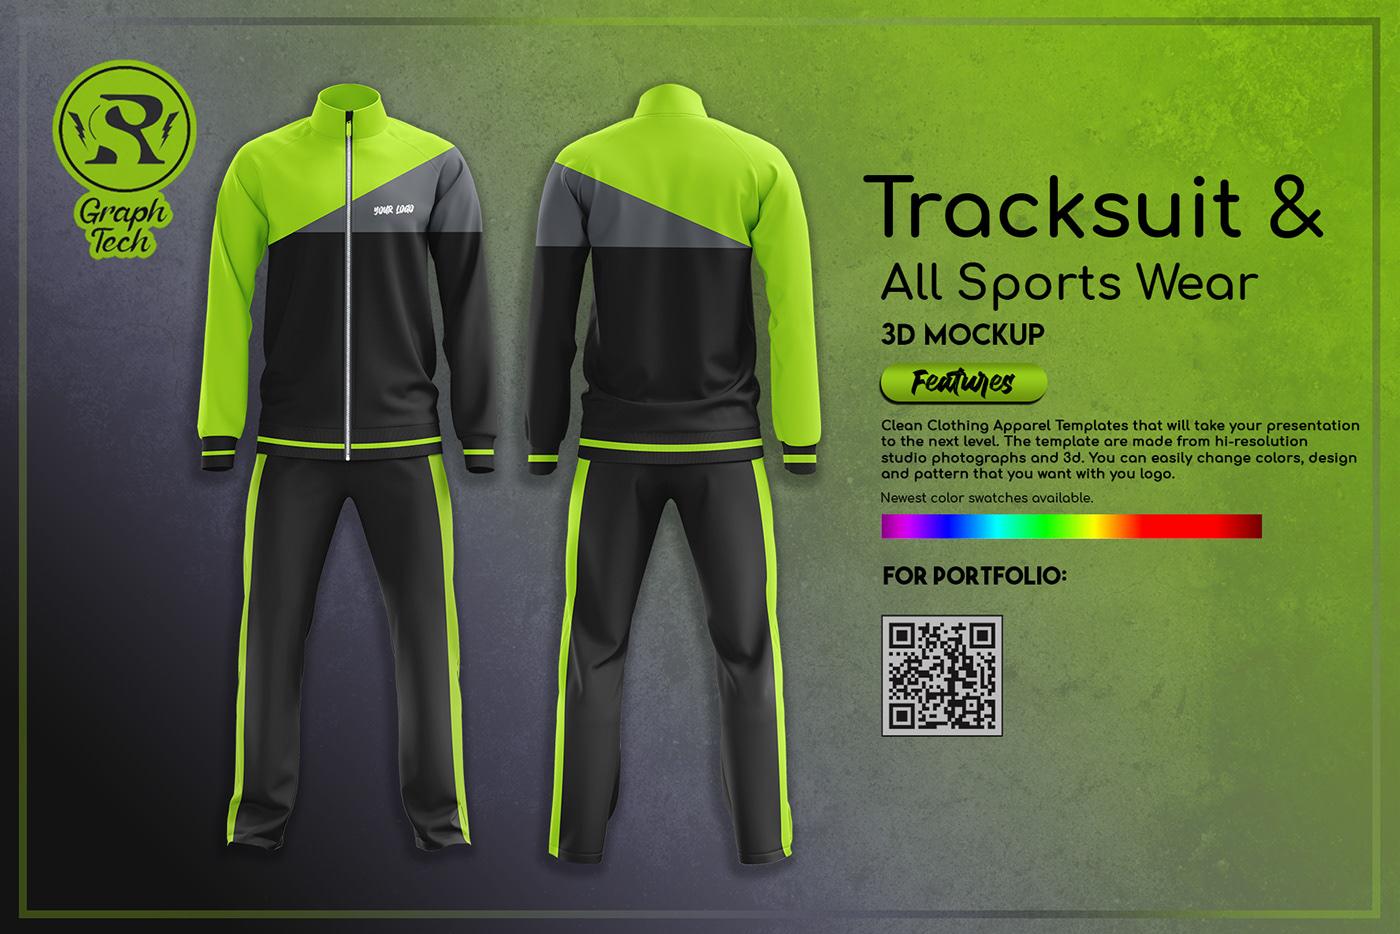 3D tracksuit mockup free psd Free psd template free track template jogging suit men's sports wear original mockup running suit Sports Wear track suit